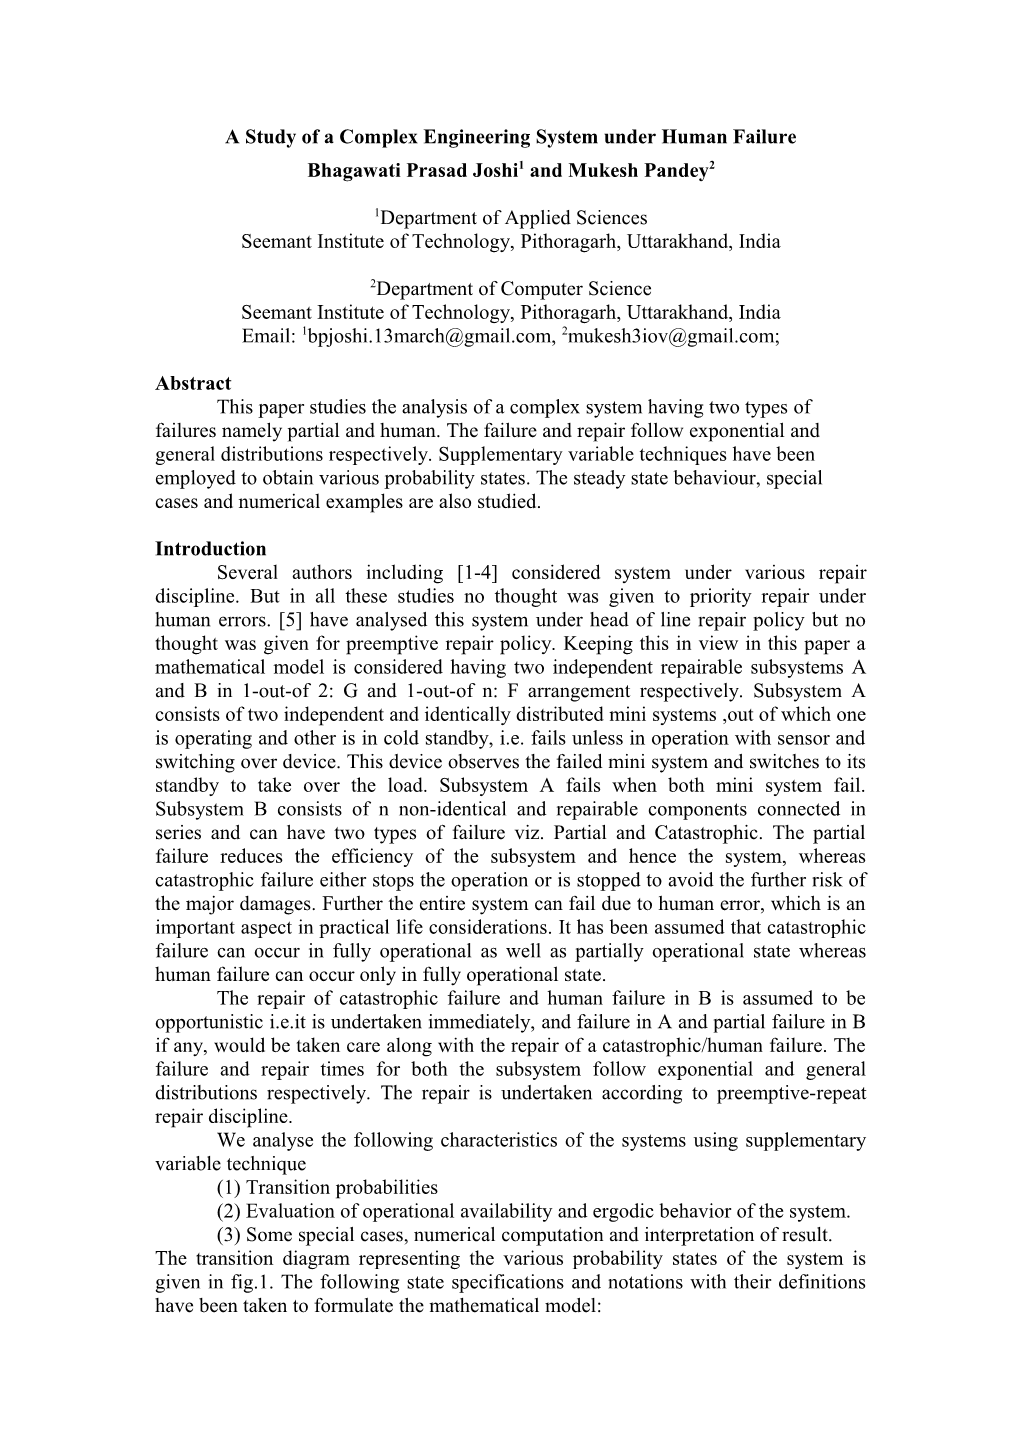 Stochastic Study of a Complex Standby Redundant System Involving the Concepts Of